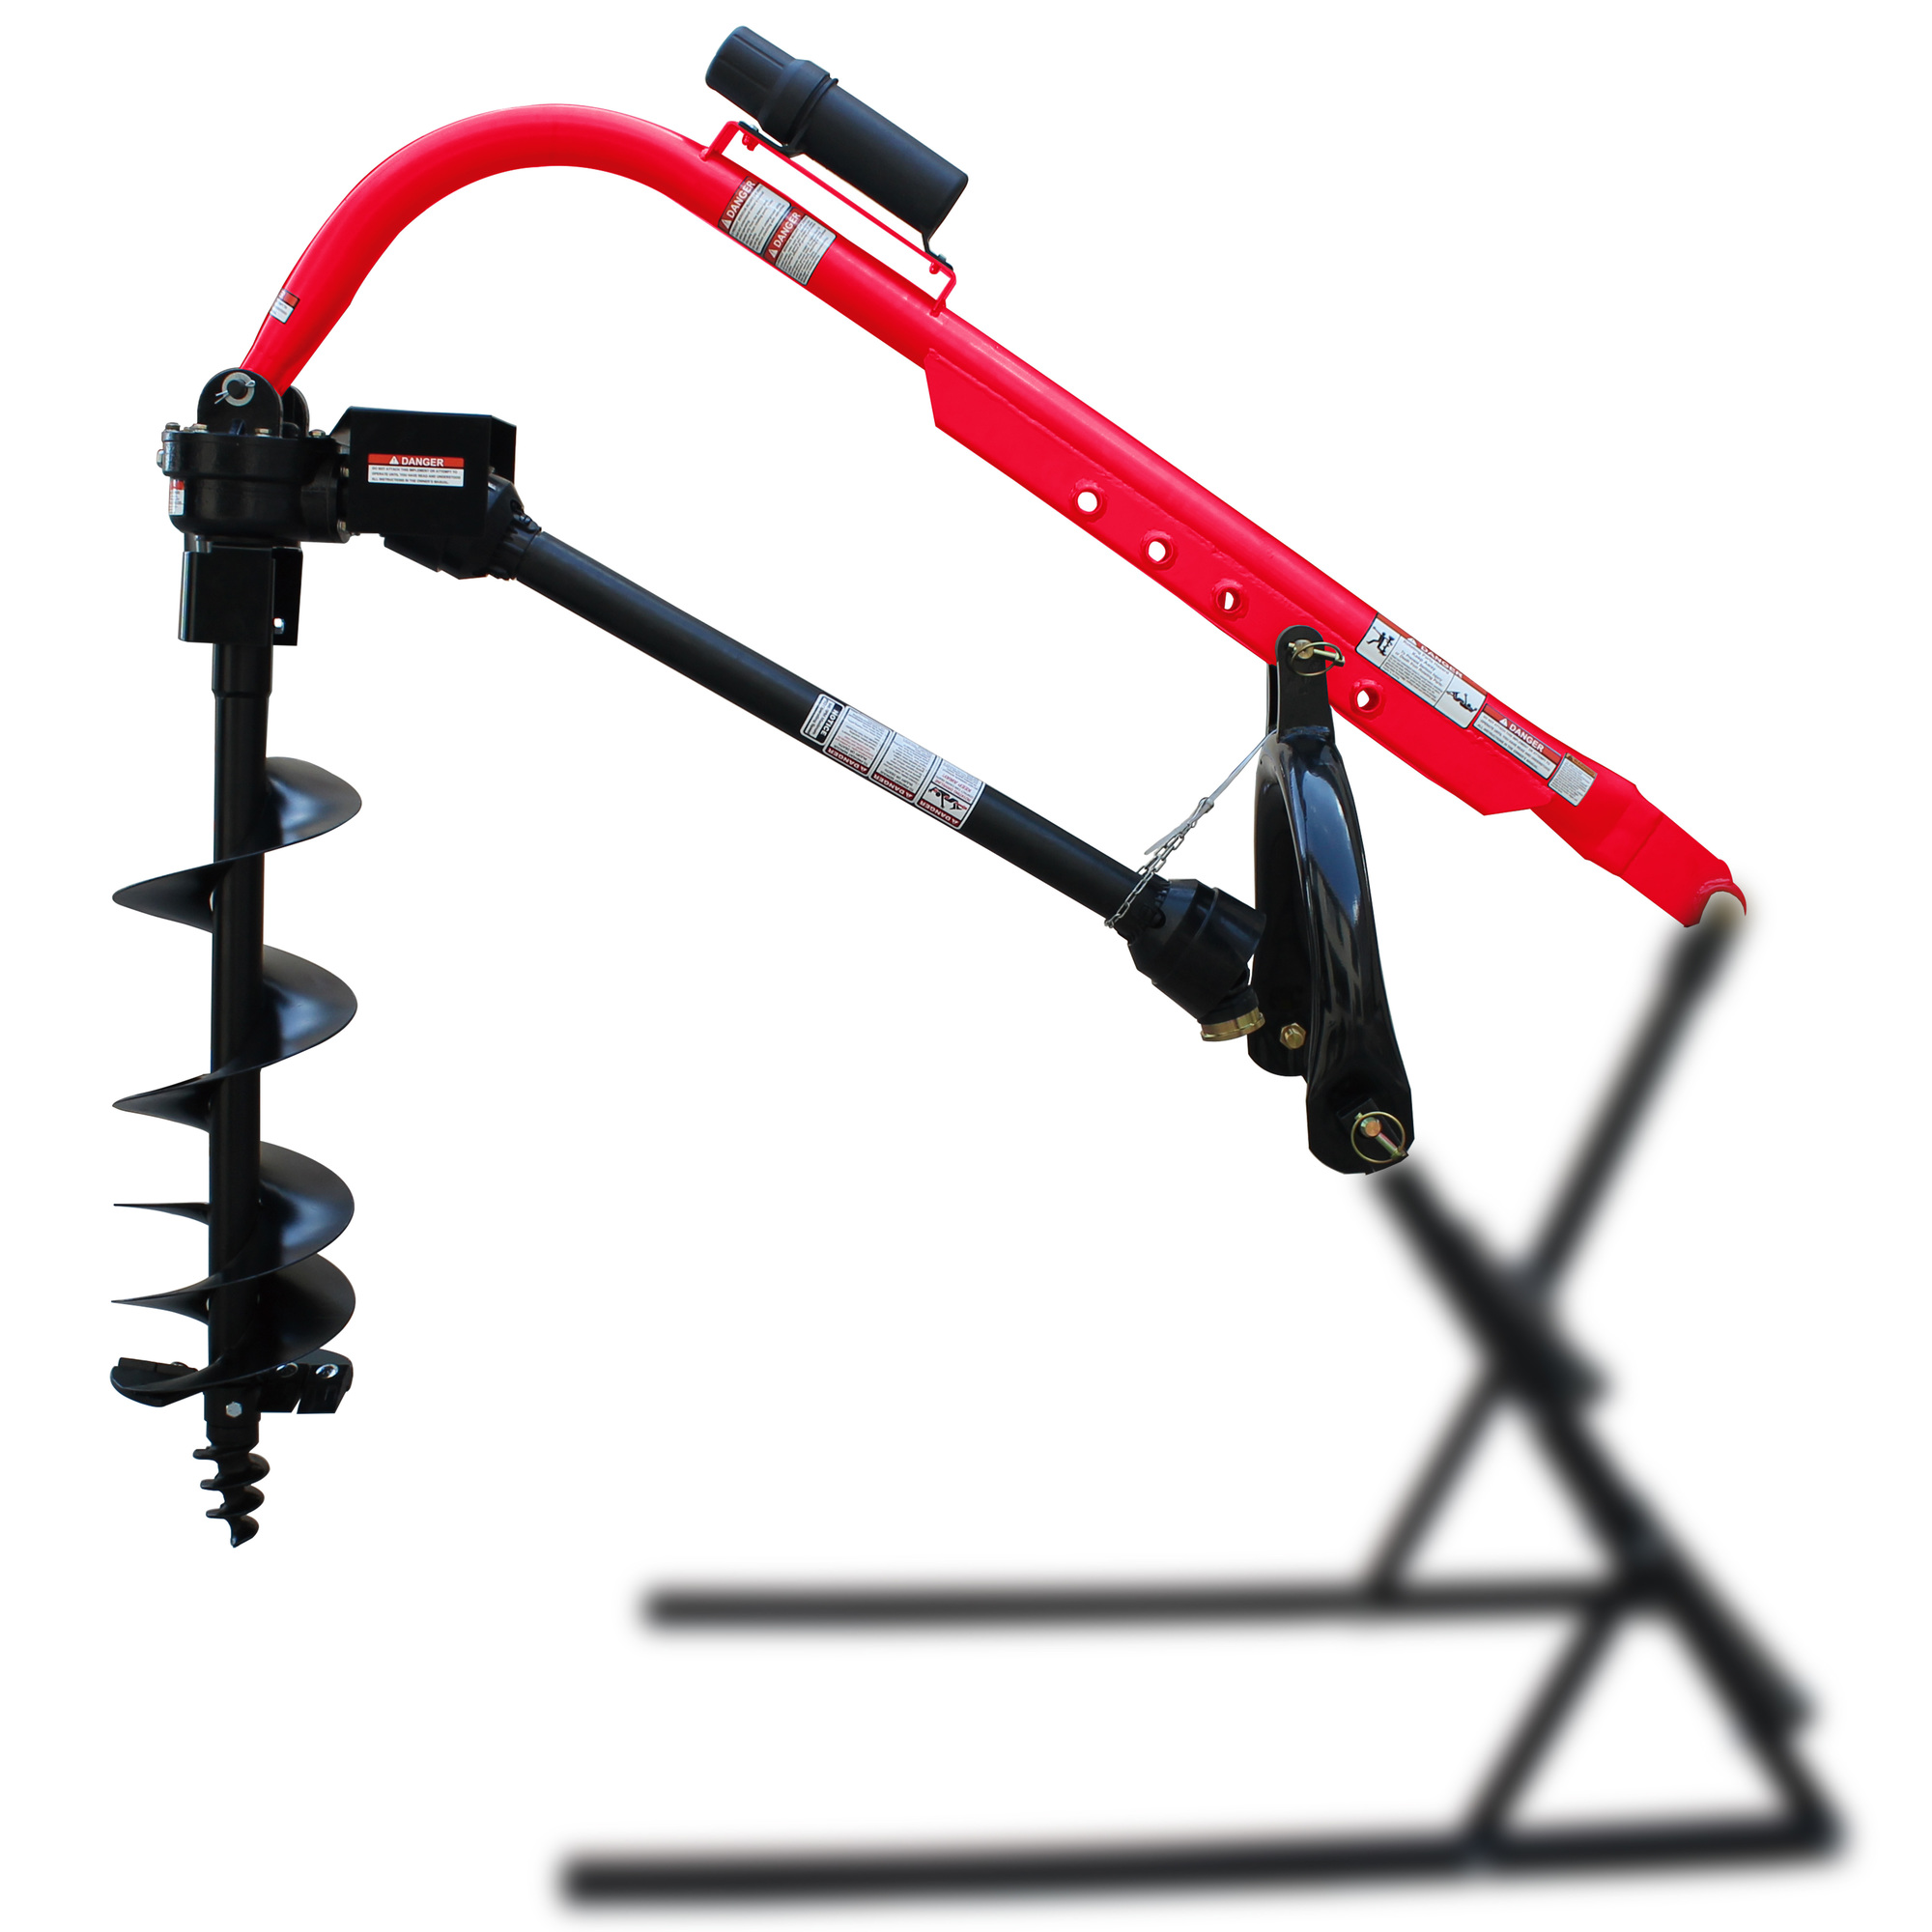 Country Pro, 3 Point Post Hole Digger, Model YTL-019-033